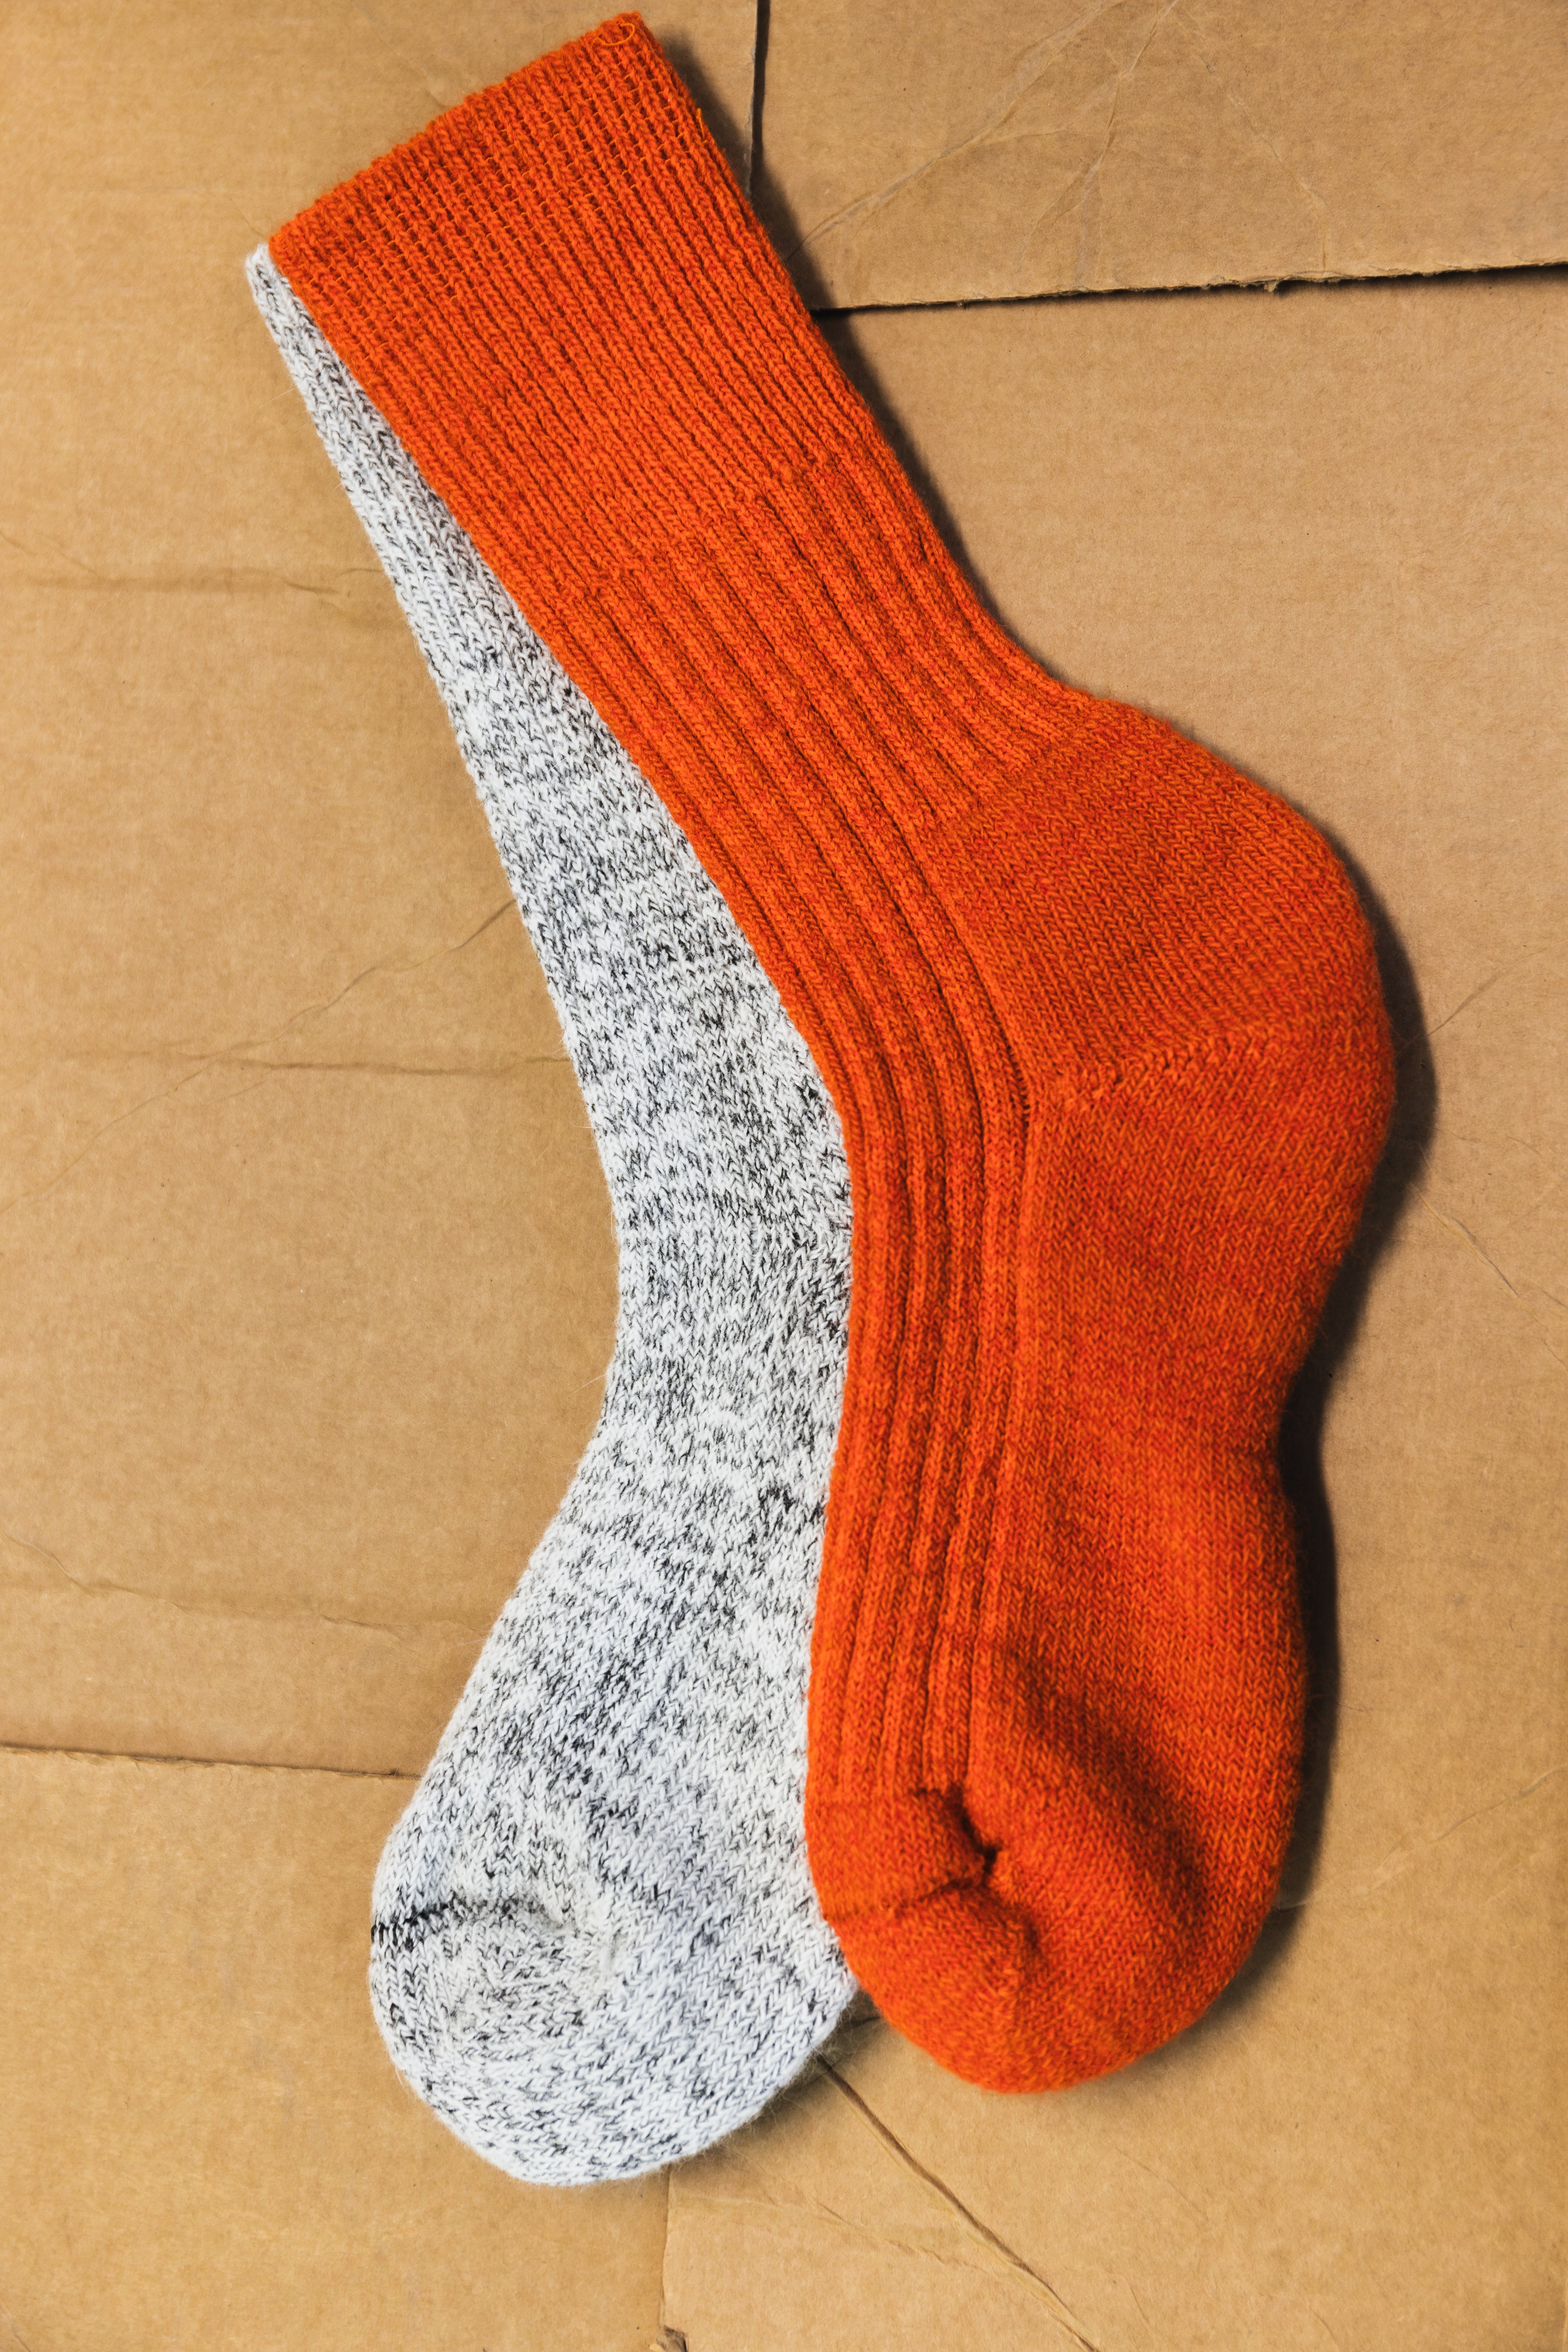 Angora Wool Socks - to support the Downs association in Iceland